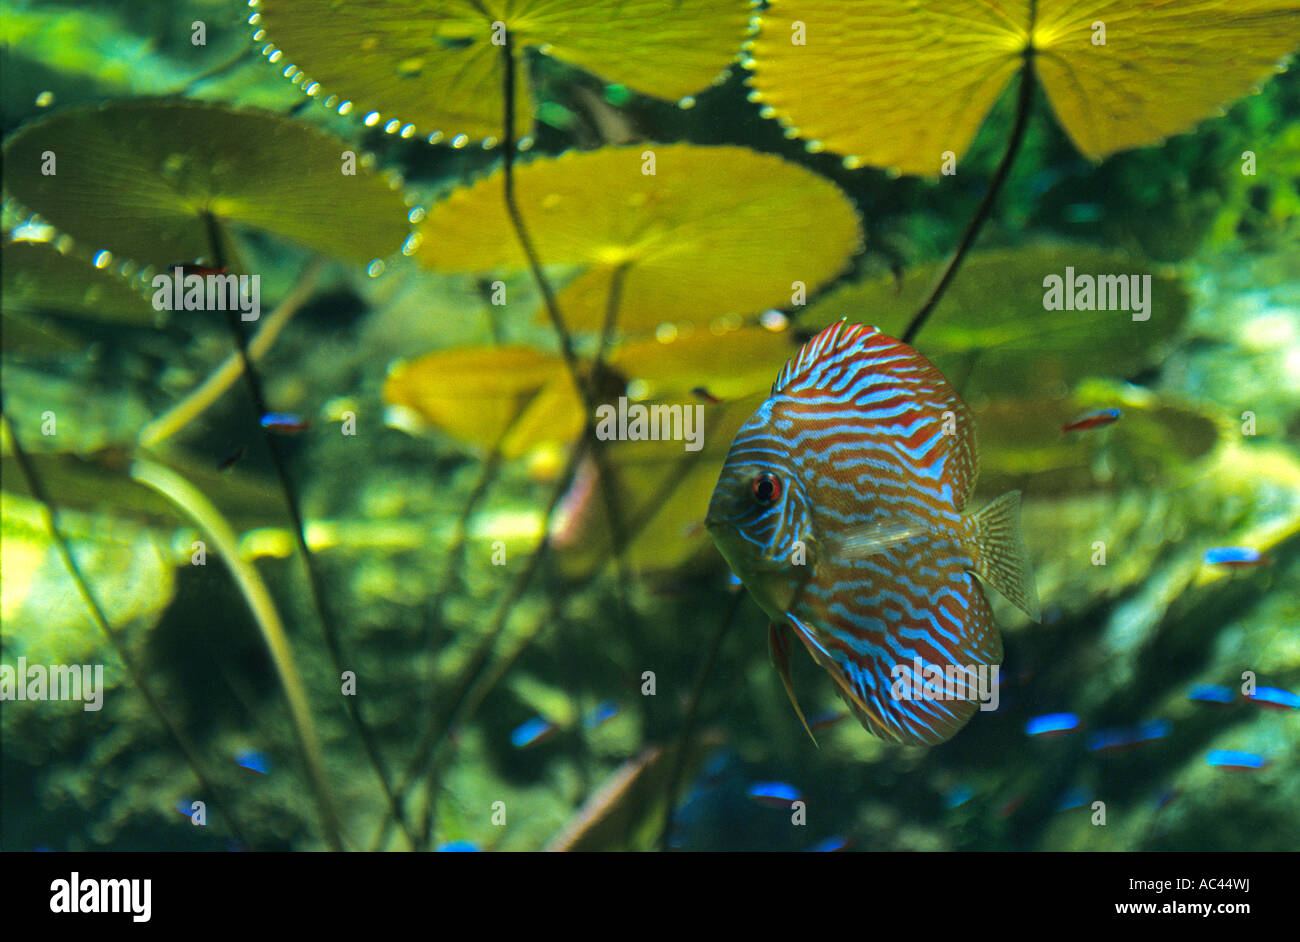 Discus and Water Lilies. Discus et Nymphéas. Stock Photo